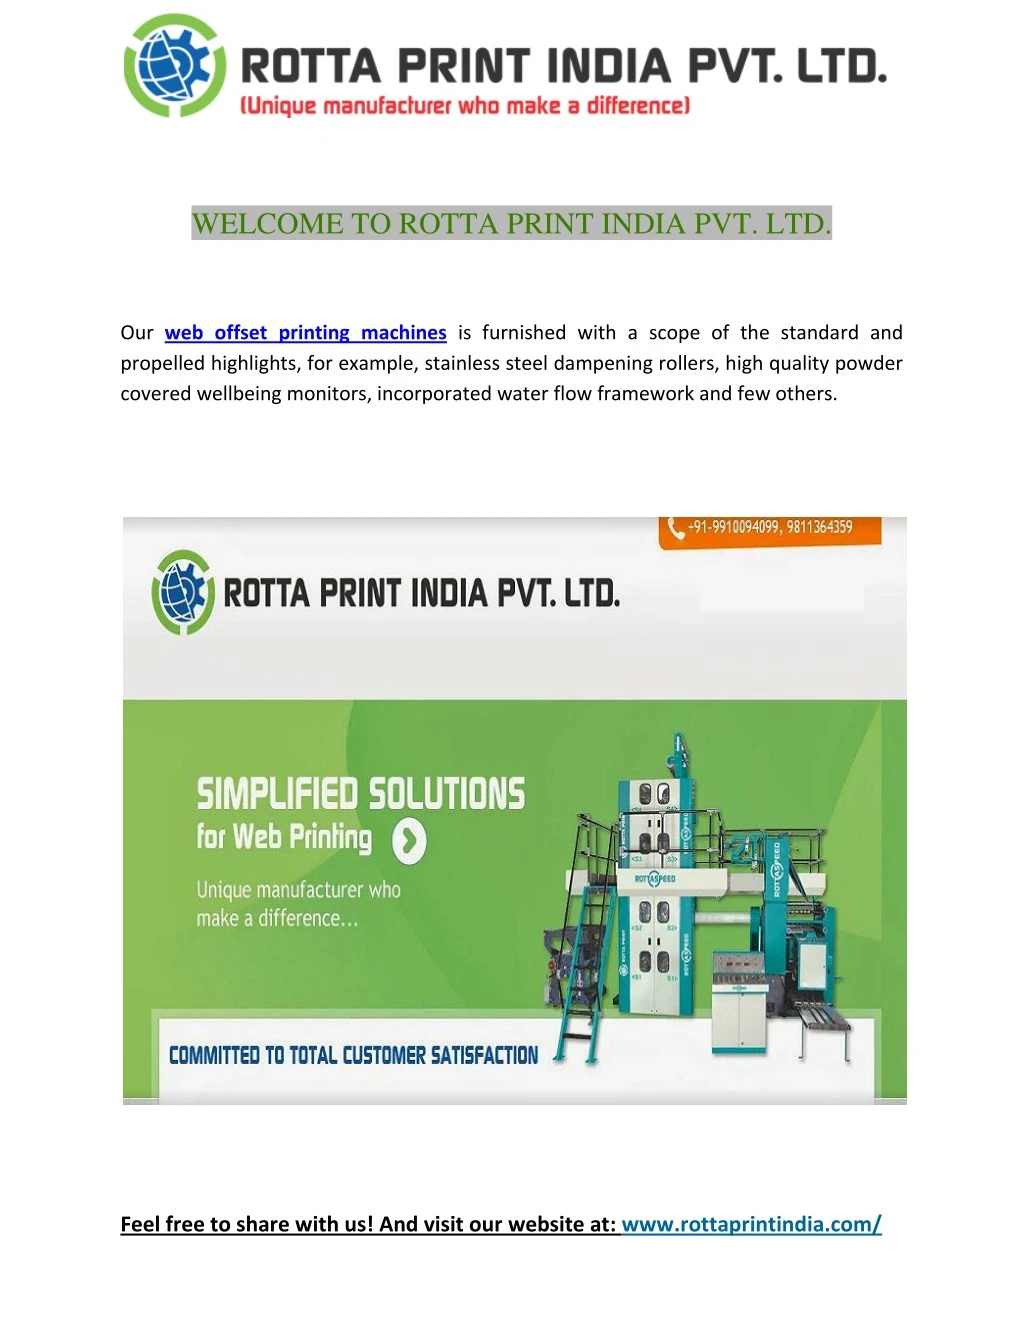 welcome to rotta print india pvt ltd